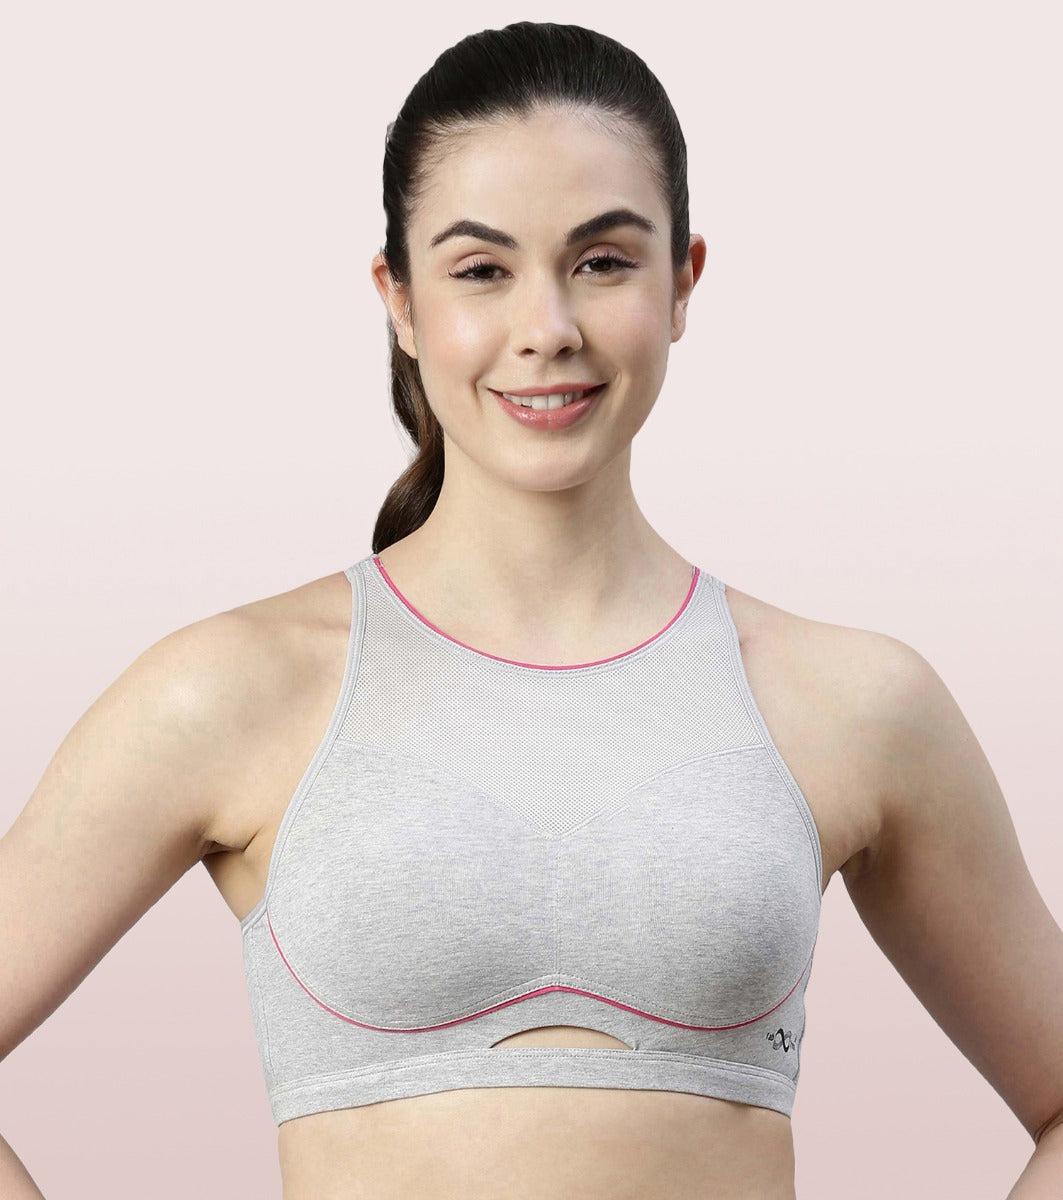 Buy Enamor Front Open Bounce Control High-Impact Full Coverage Sports Bra  for Women Online